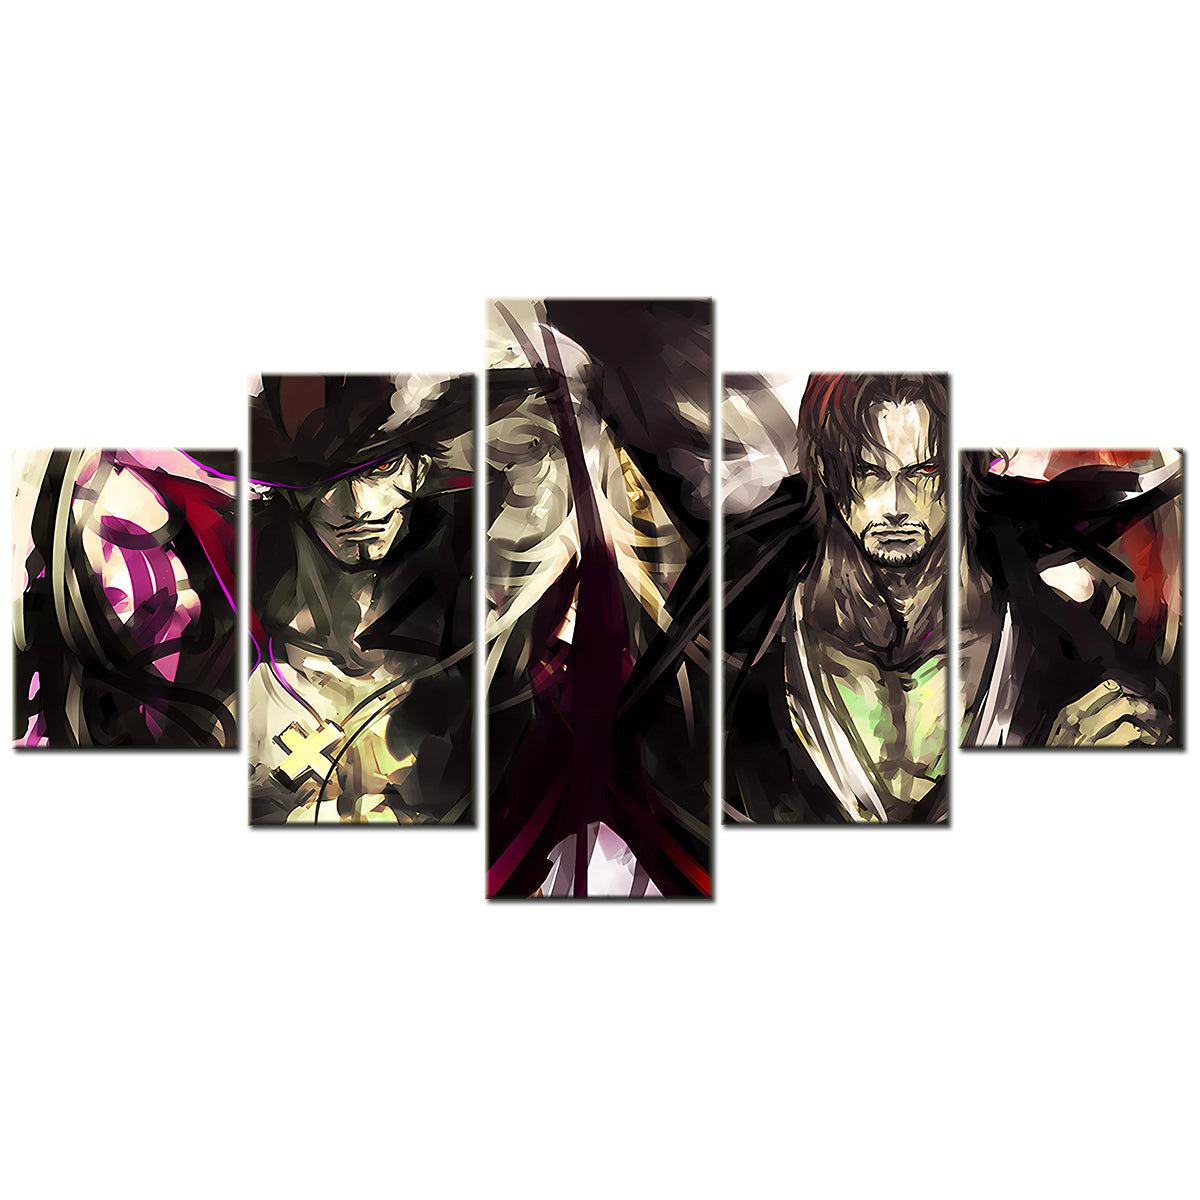 One Piece - 5 Pieces Wall Art - Shanks - Portgas D. Ace - Printed Wall Pictures Home Decor - One Piece Poster - One Piece Canvas